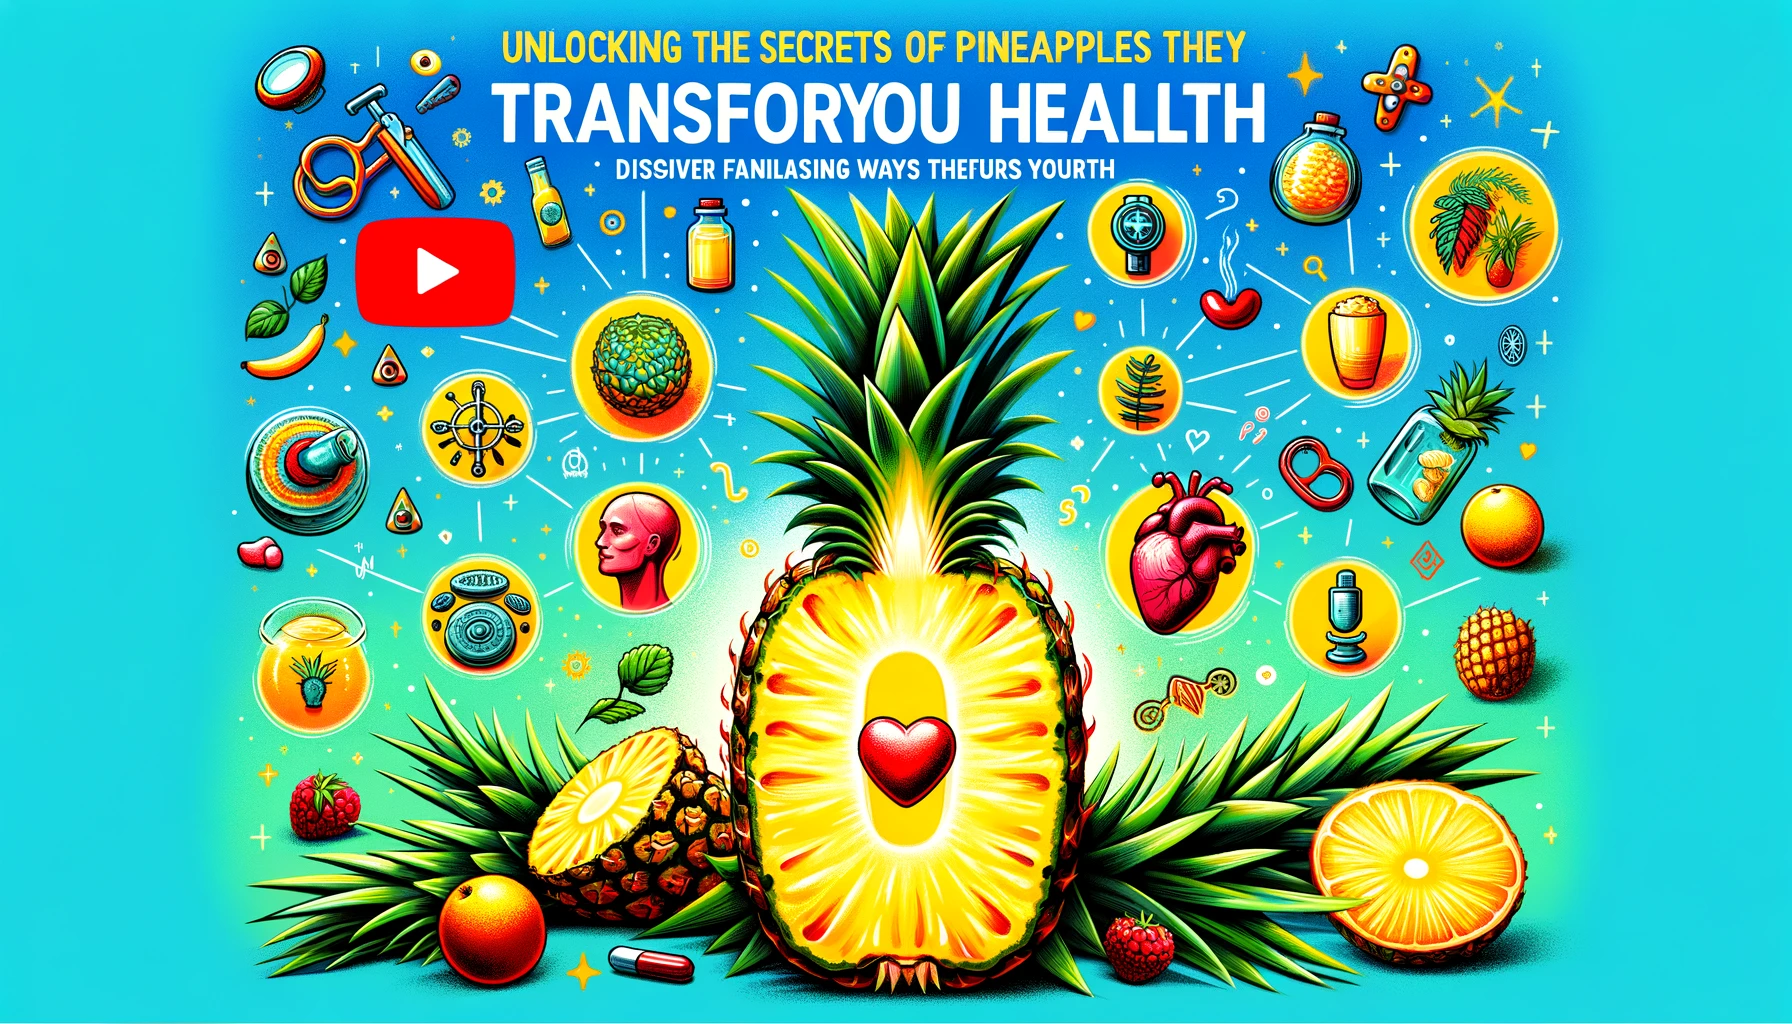 “Unlocking the Secrets of Pineapples: Discover 9 Fascinating Ways They Transform Your Health”